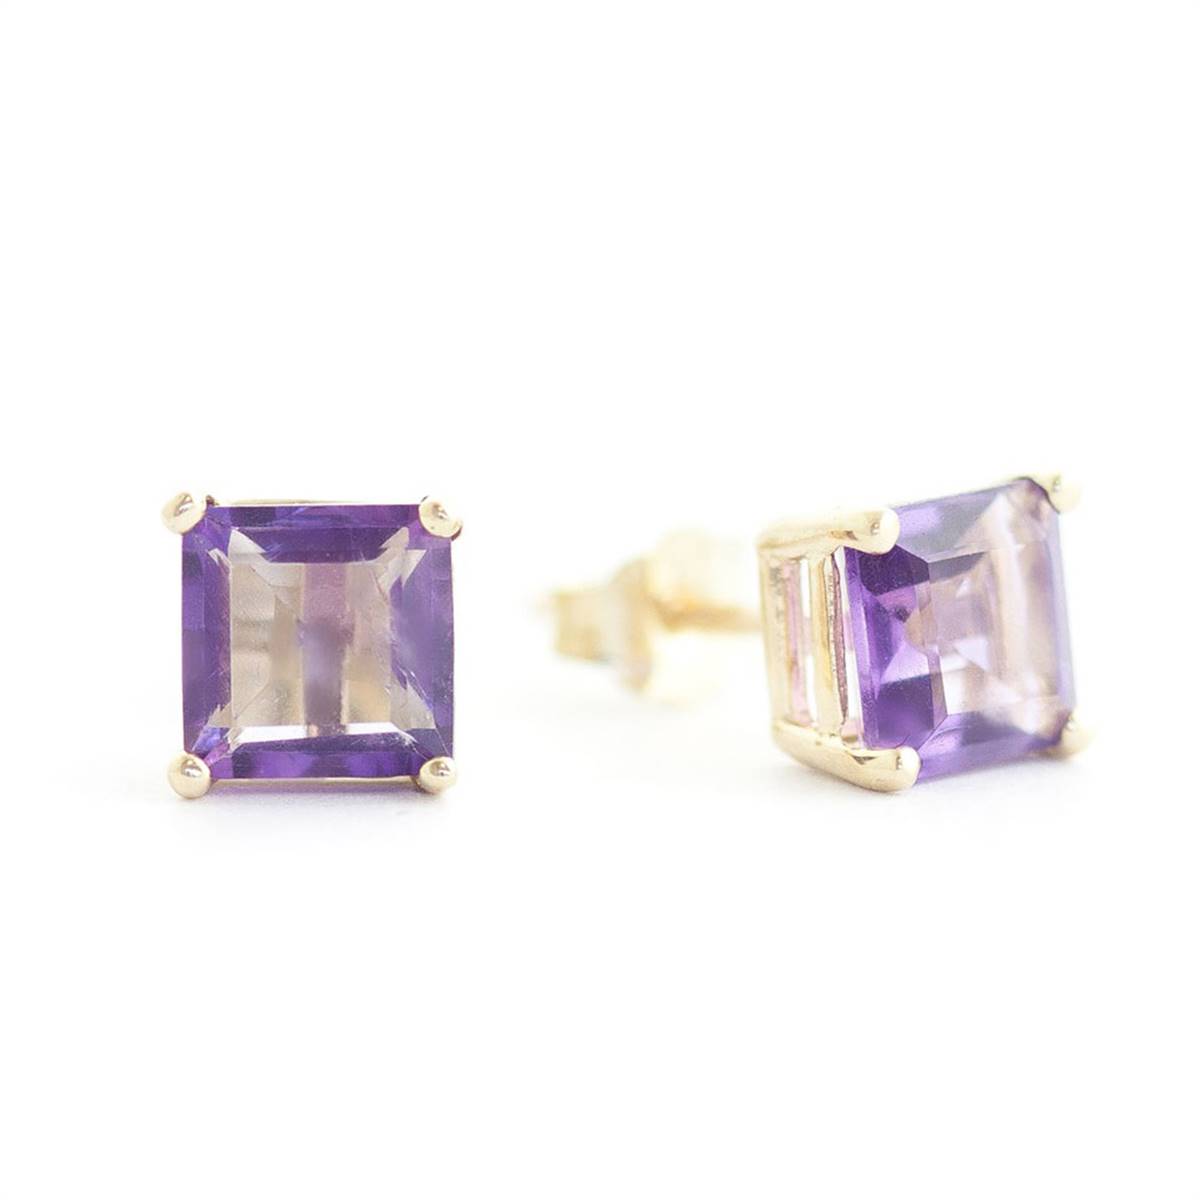 1.75 Carat 14K Solid Yellow Gold Accomplished Amethyst Earrings